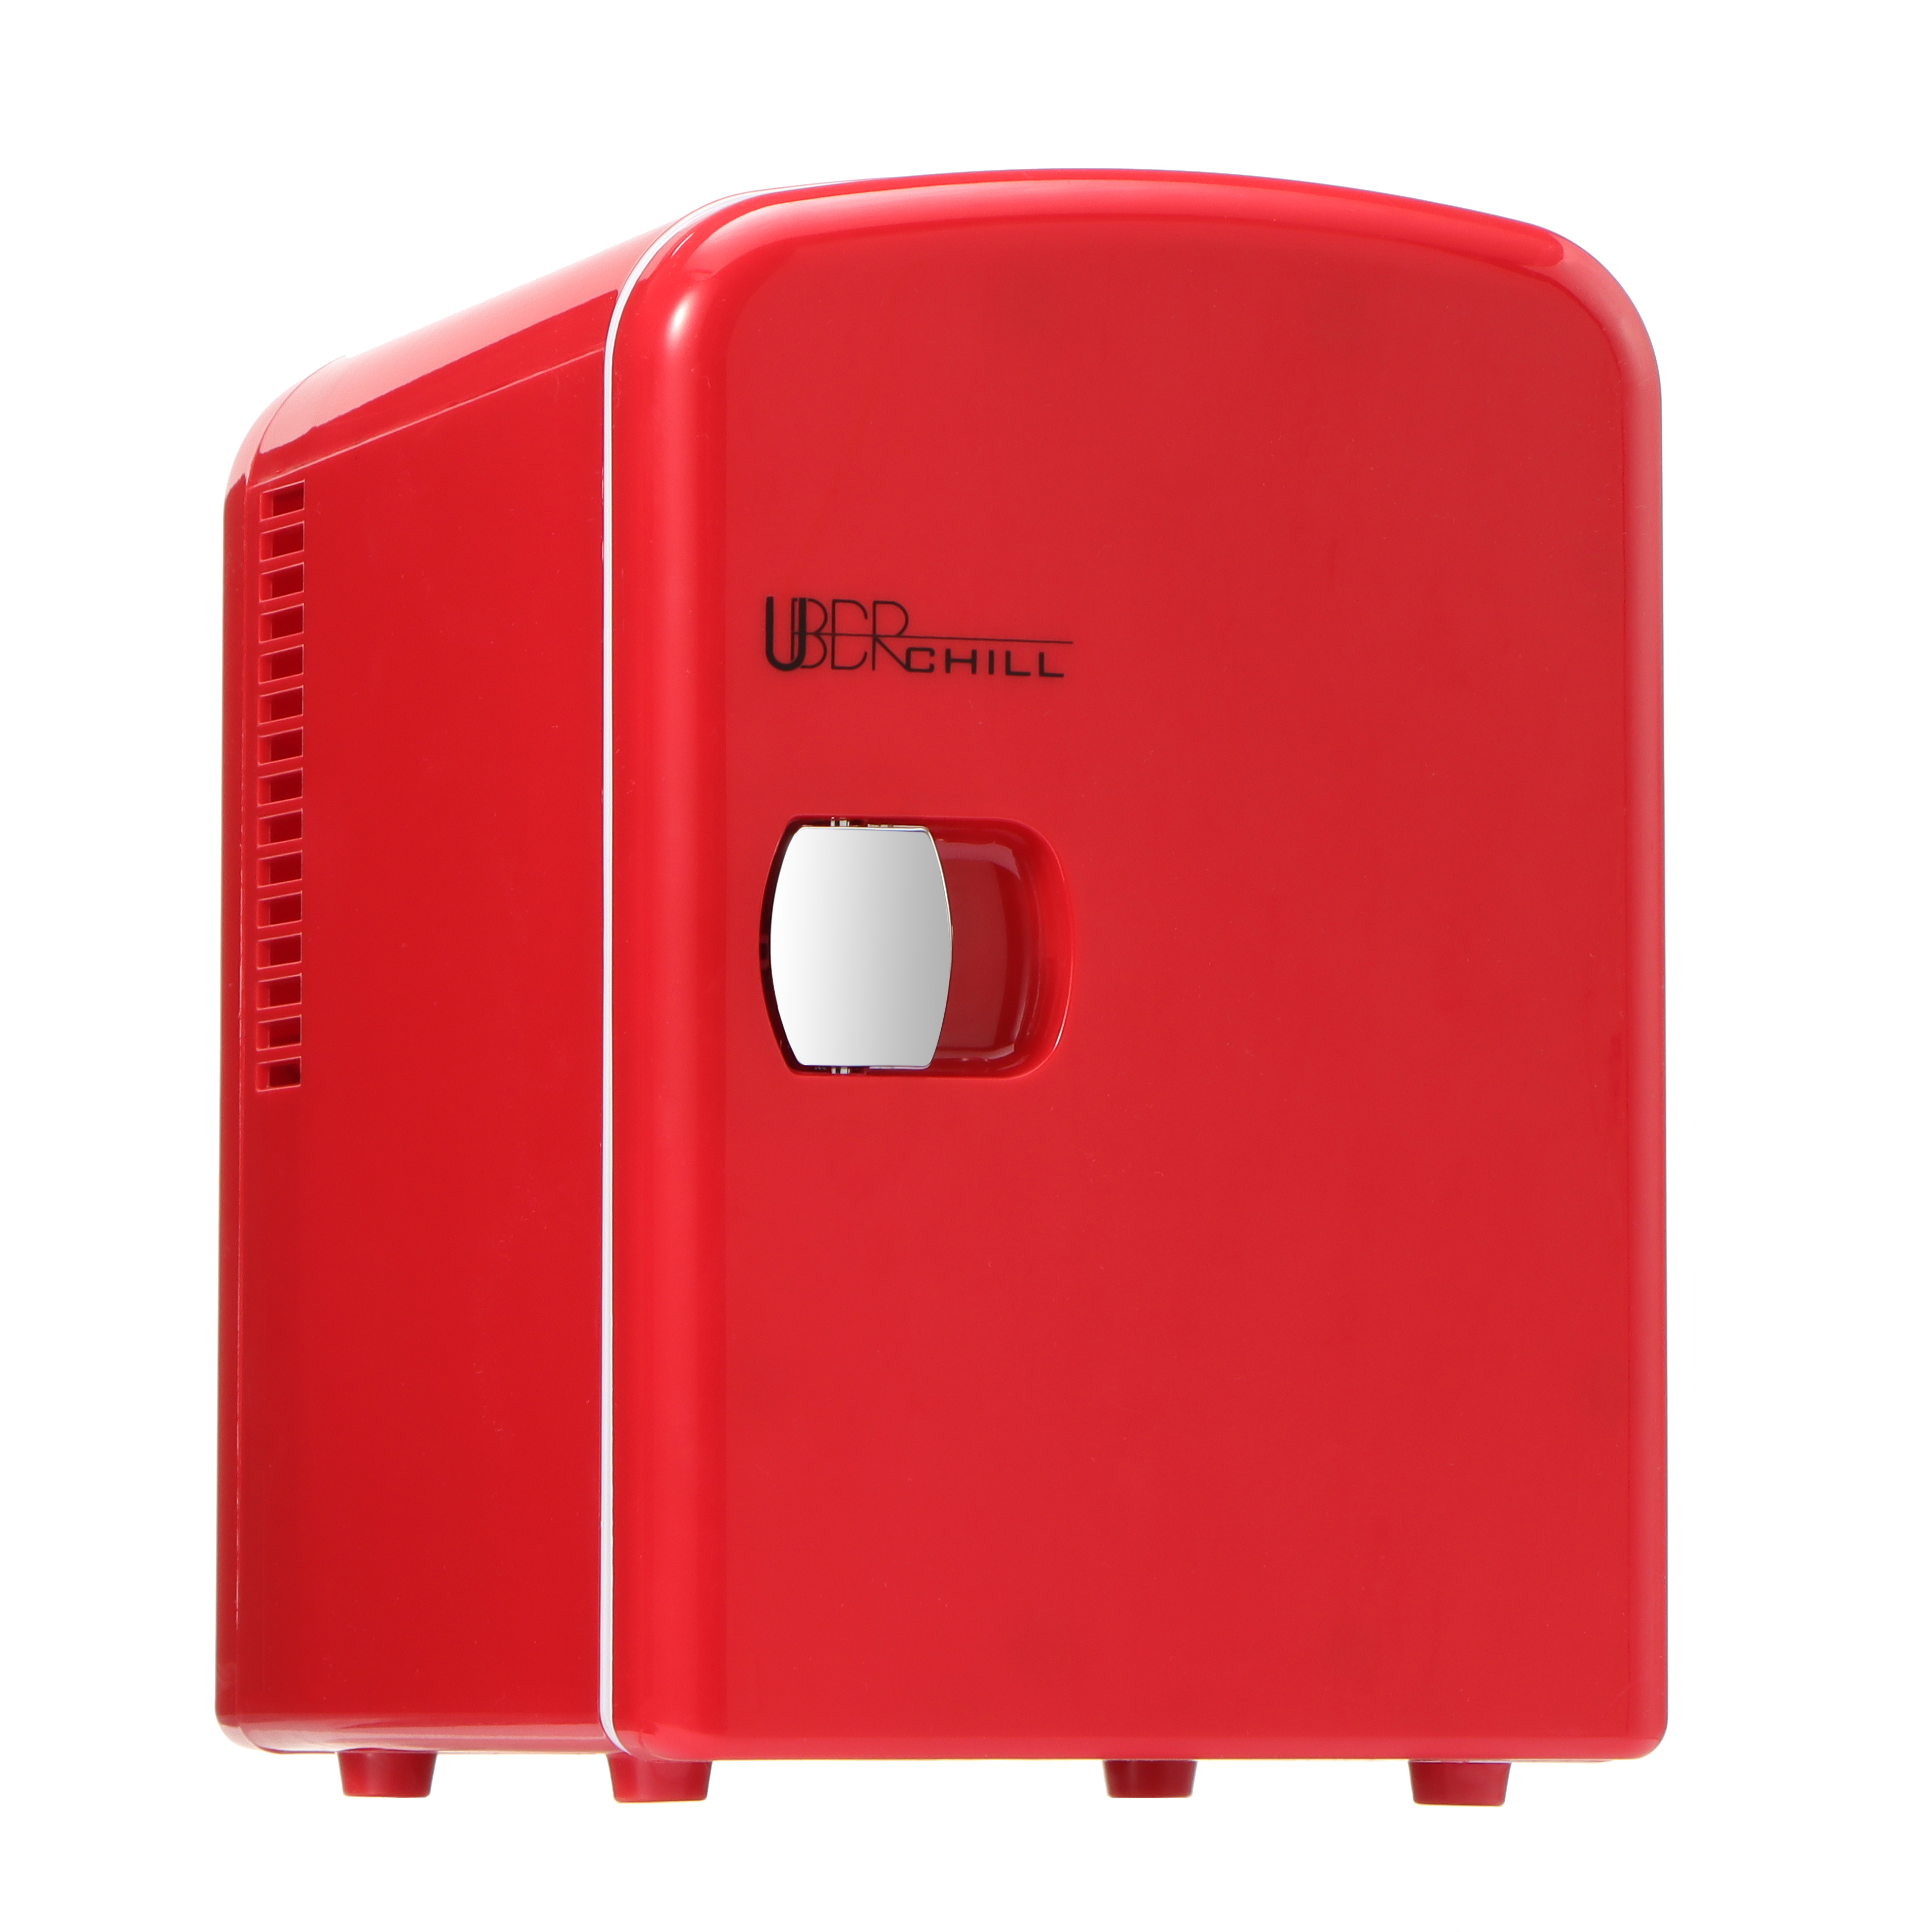 Uber Appliance Chill 6-can Retro Portable Mini Fridge Red Thermoelectric - image 2 of 18